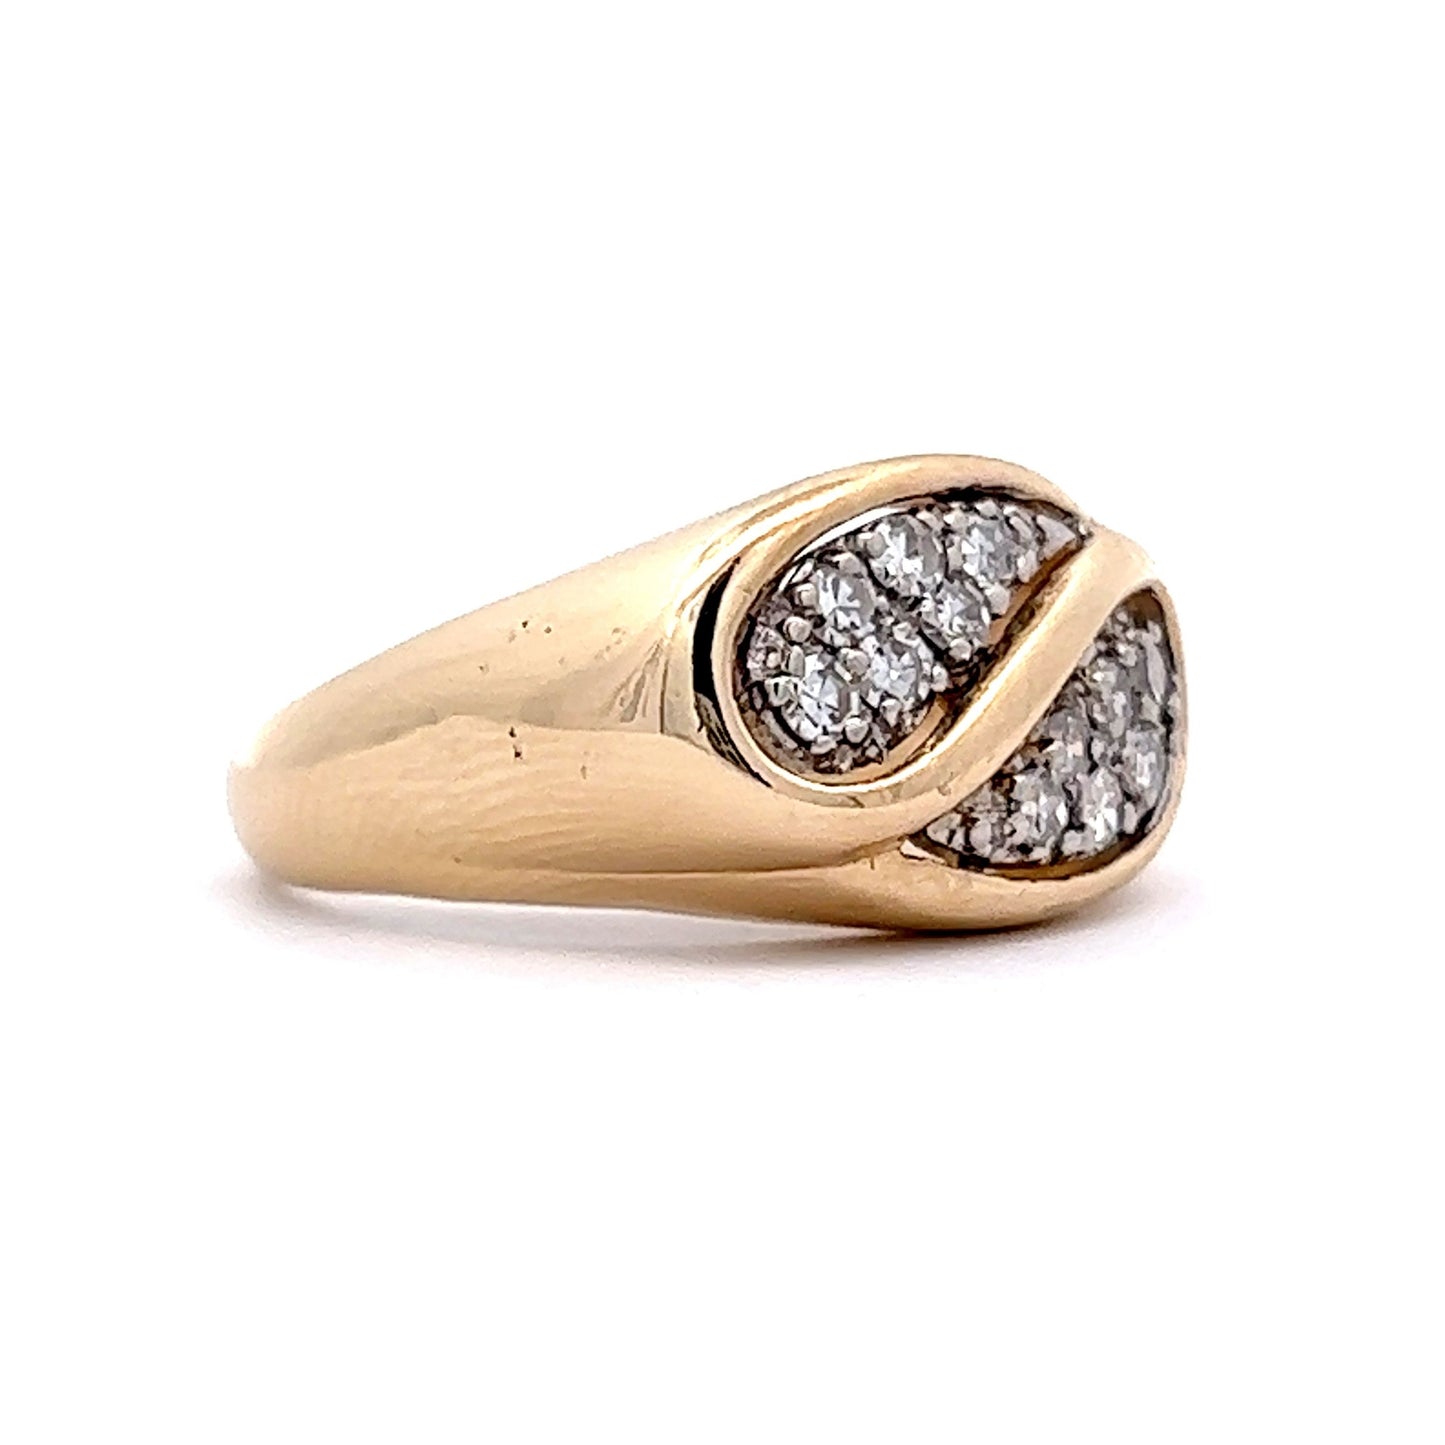 Vintage Mid-Century Pave Diamond Cocktail Ring in 14k Yellow & White Gold